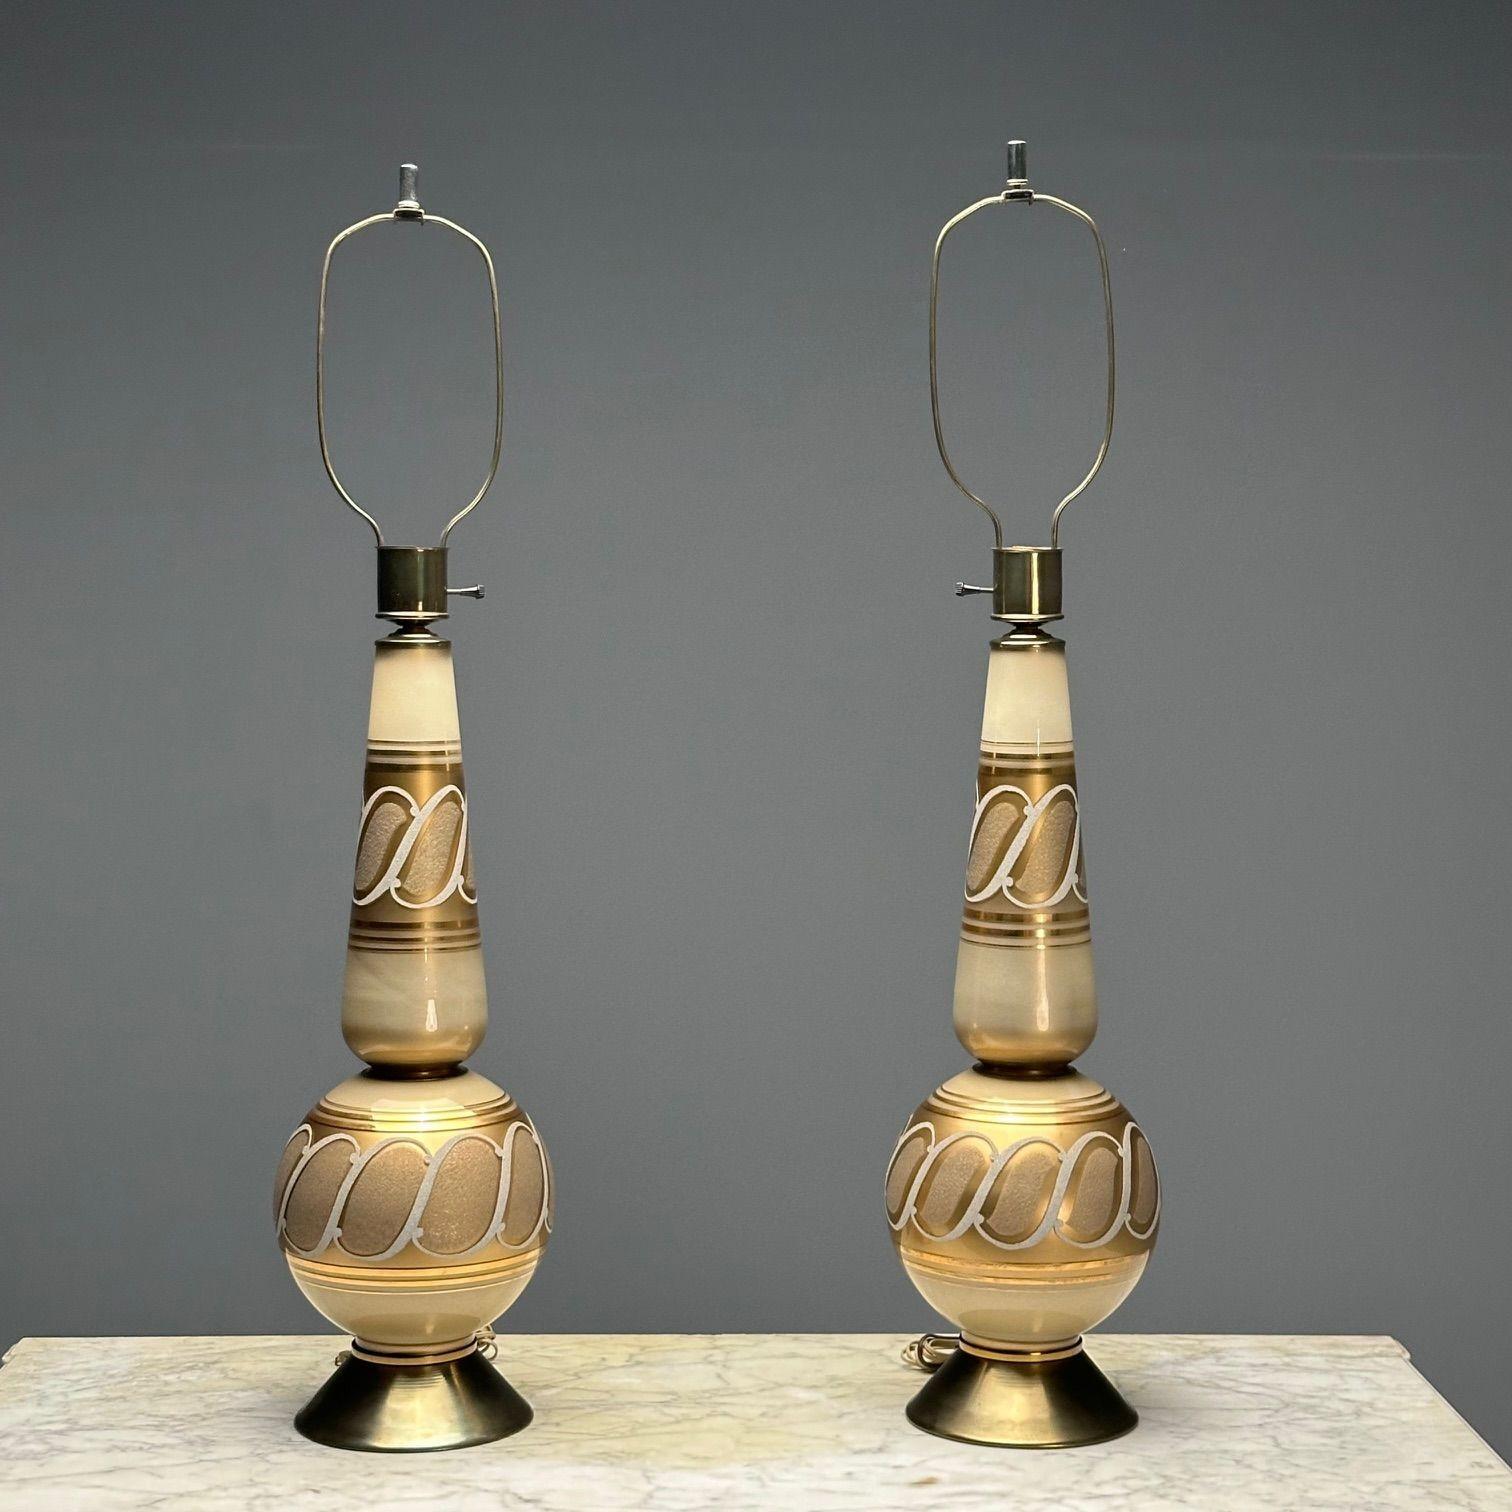 Italian Mid-Century Modern, Large Table Lamps, Gold Glass, Brass, Italy, 1960s For Sale 2